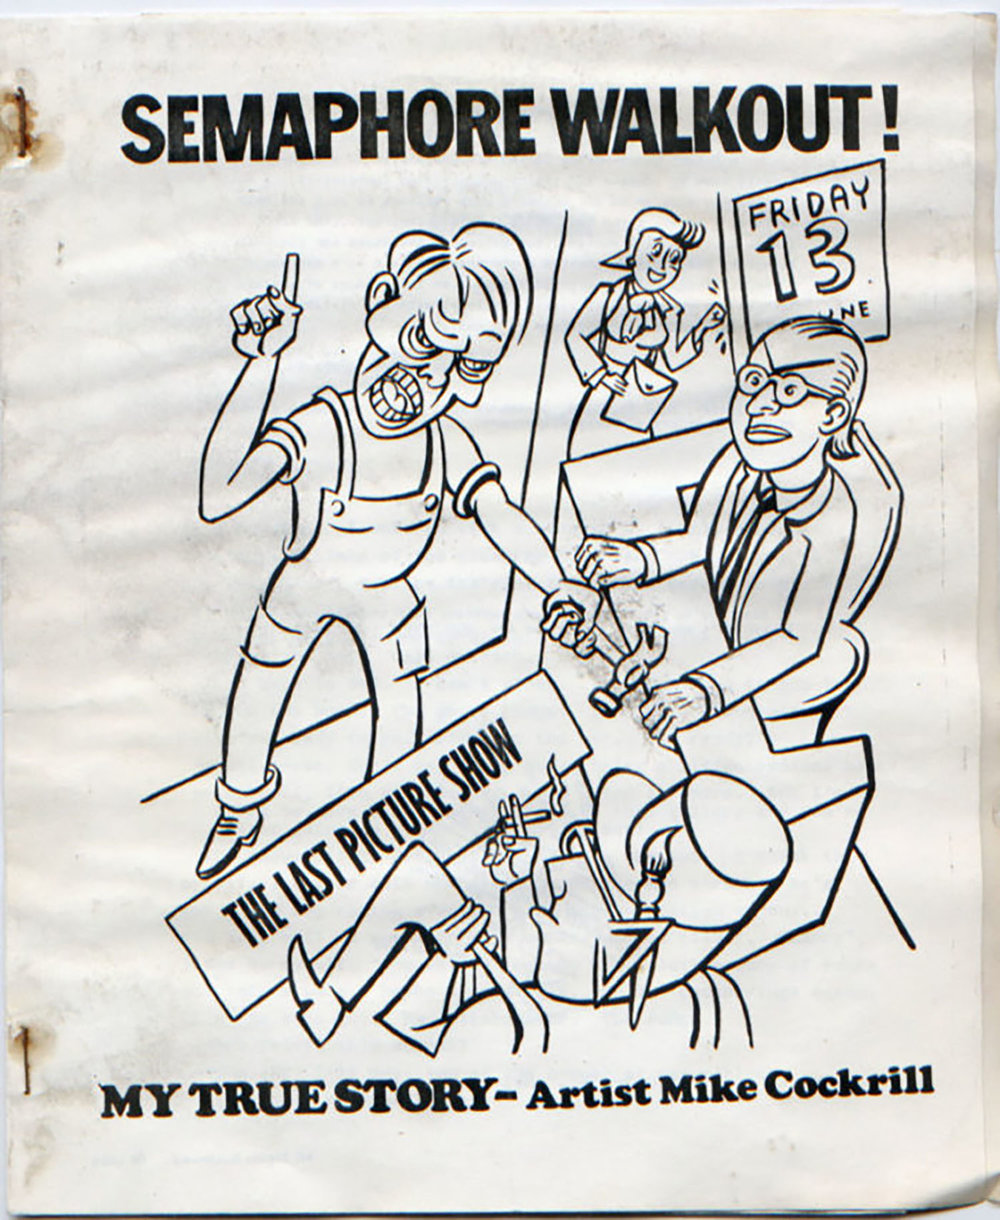 Semaphore, Semaphore Walkout! Artist Statement By Mike Cockrill, 1986